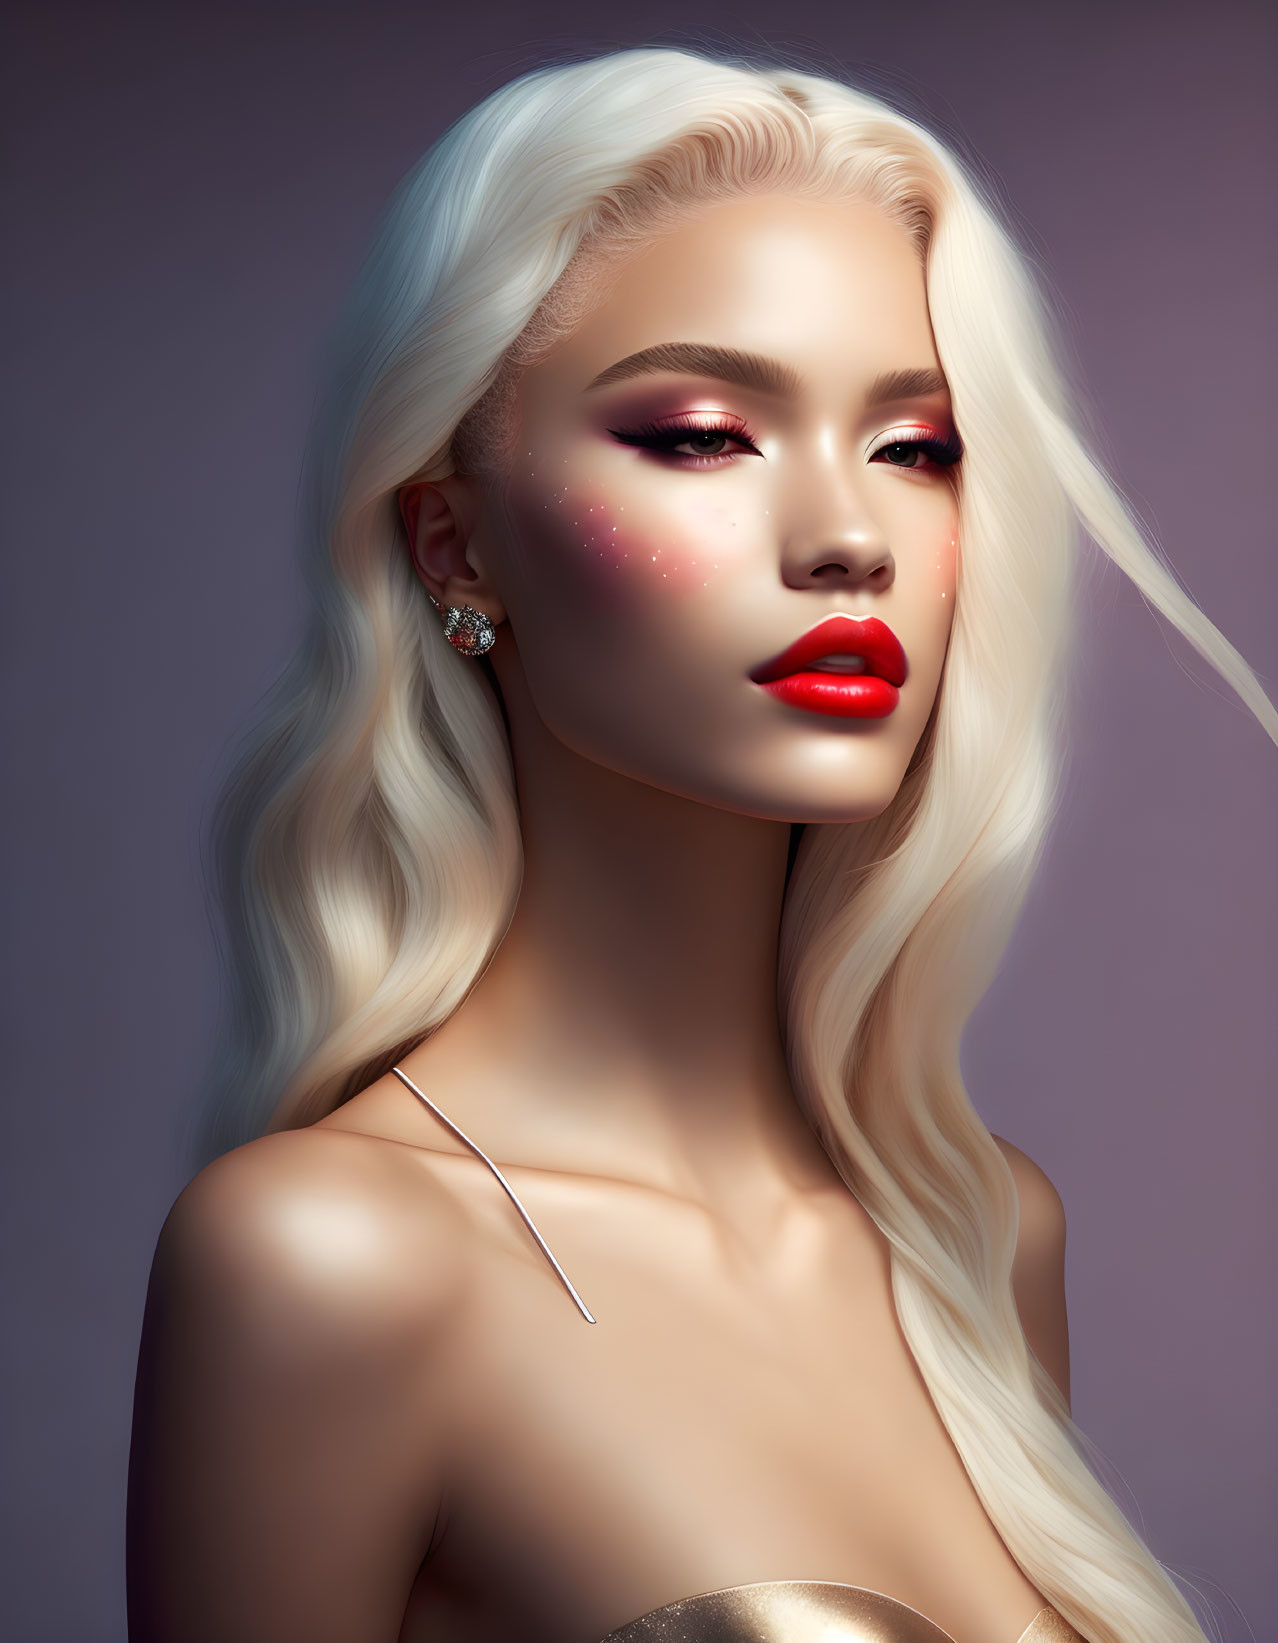 Portrait of woman with platinum blonde hair, red lipstick, and glittery eye makeup on purple background